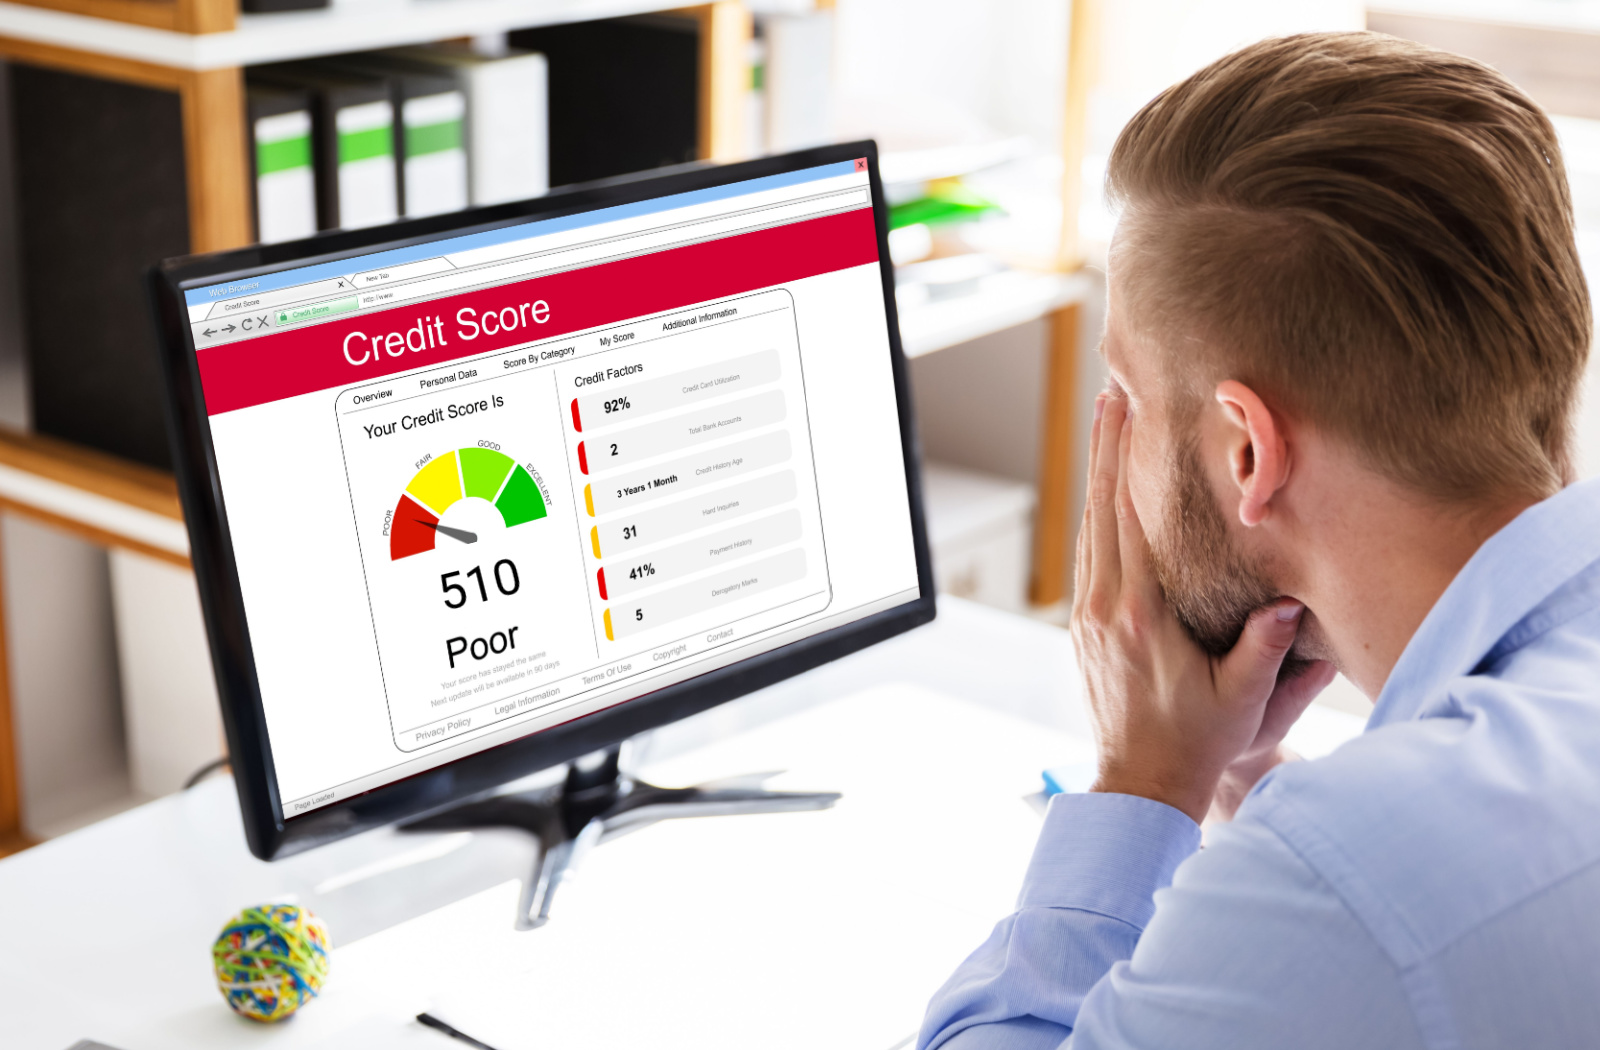 A man looking at his low credit score of 510 on a computer screen.